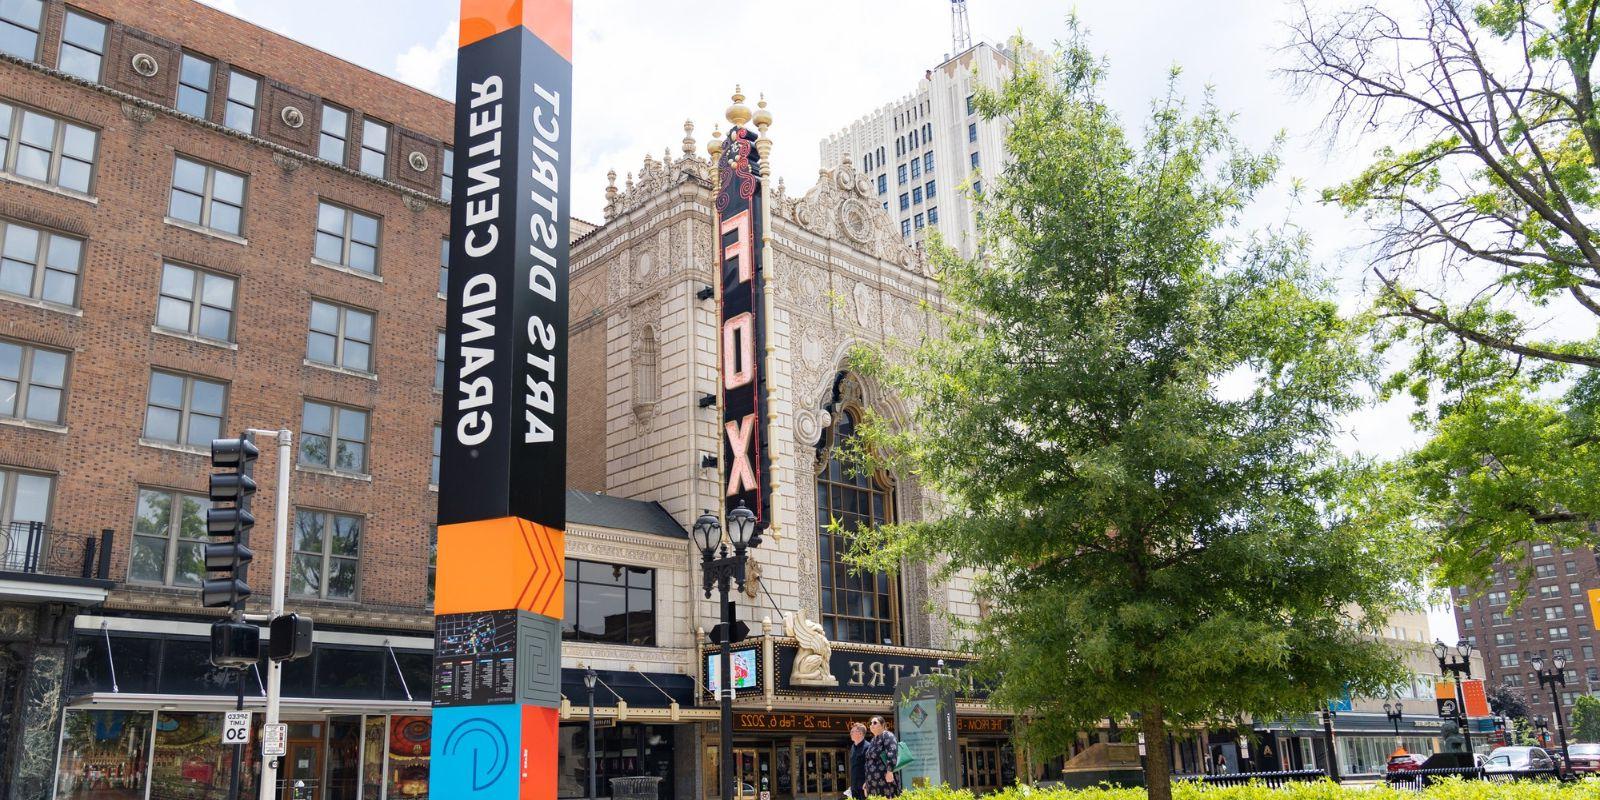 Eclectic venues, such as The Fabulous Fox and Jazz St. Louis, line the streets of the Grand Center Arts District.